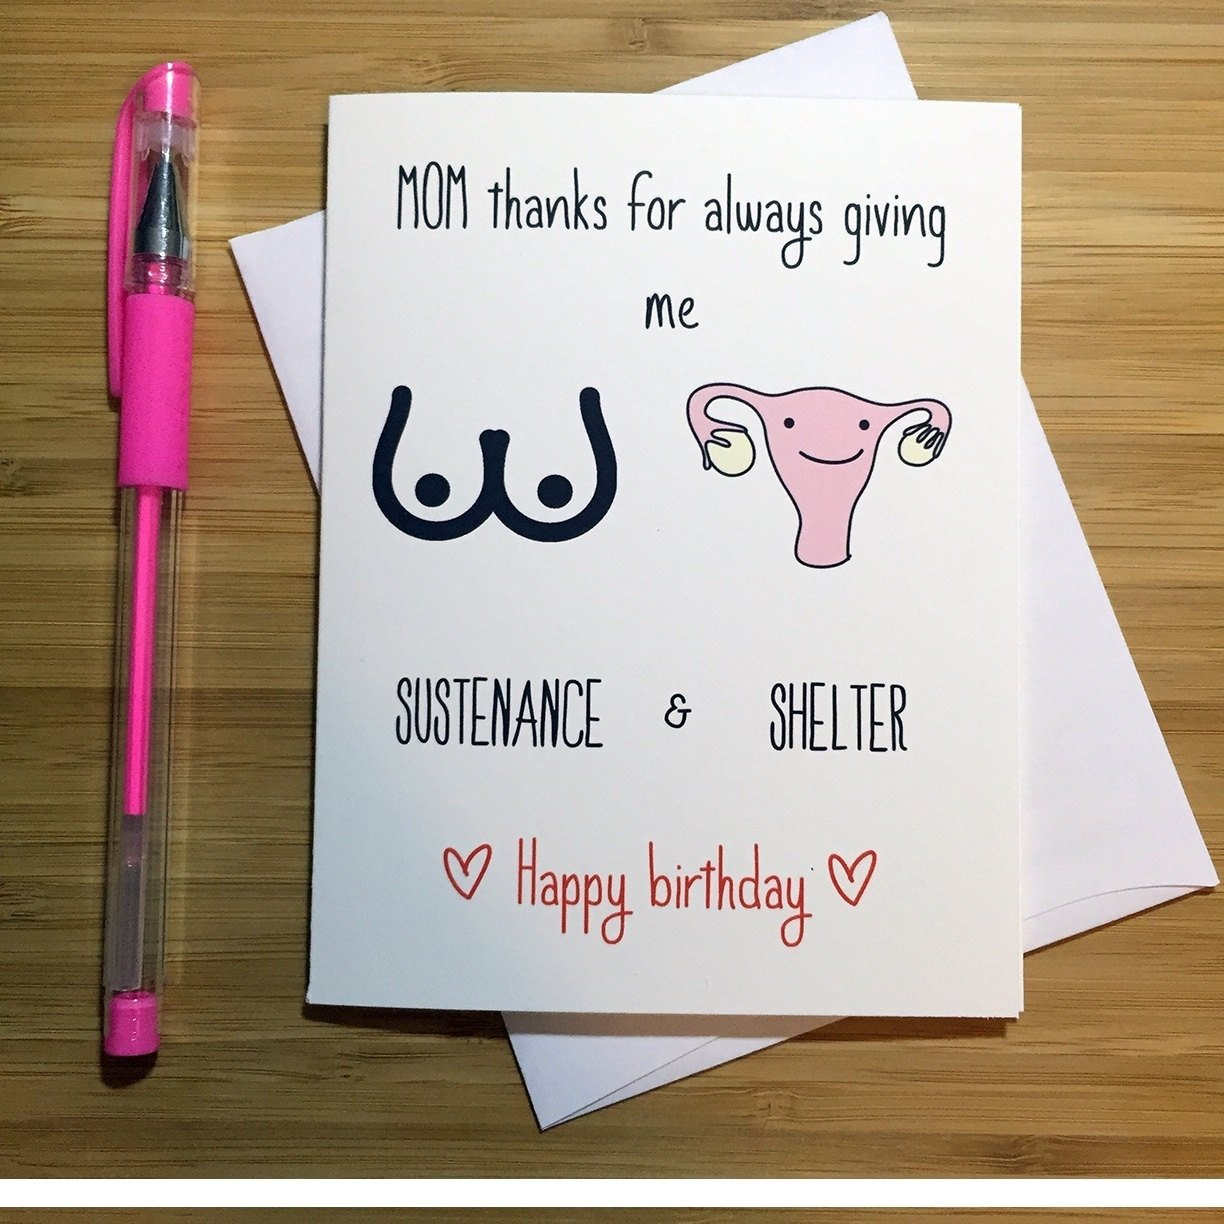 Good Card Ideas For Dads Birthday 10 Beautiful Dad Birthday Gift Ideas From Daughter 2019